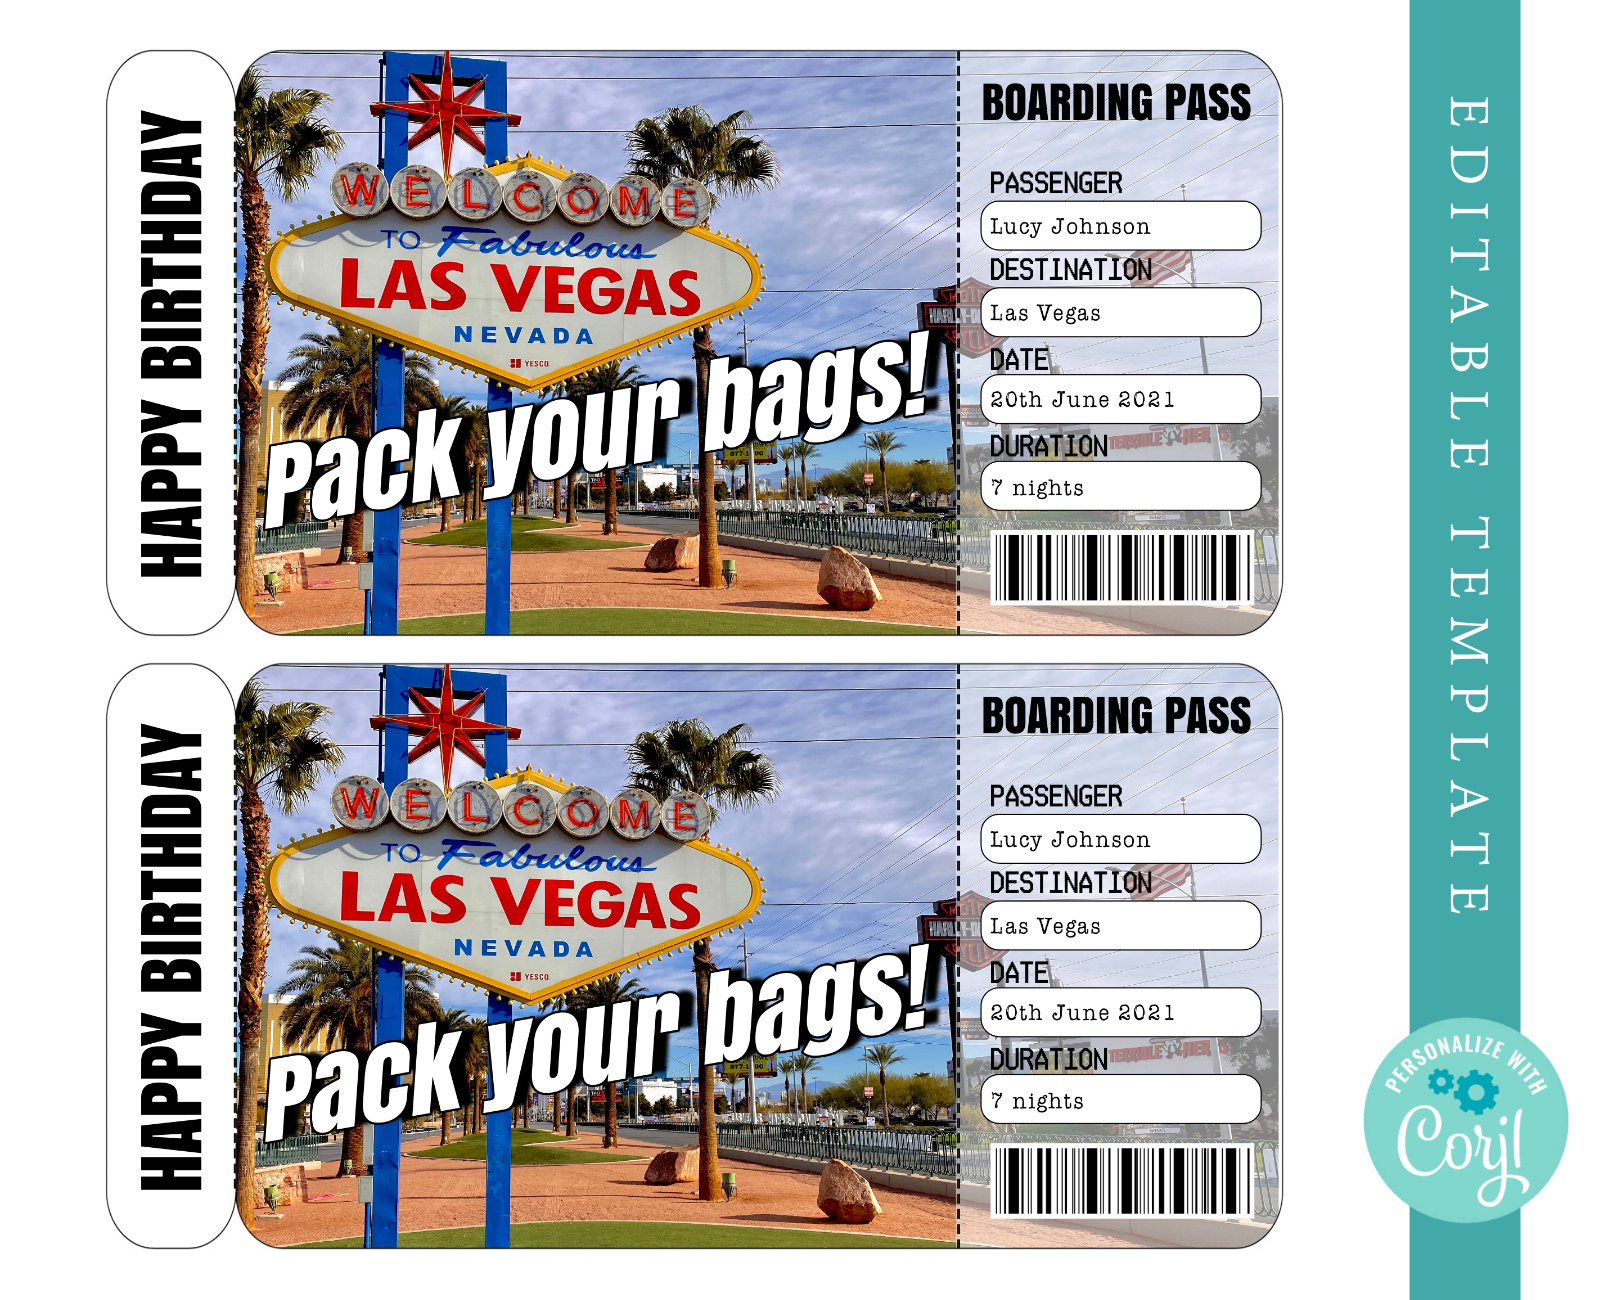 Cowabunga Bay Las Vegas - Save BIG on 2020 Passes and Family Pass Packs  with over 130 days of fun! 😎 PLUS our payment plan offer has been  EXTENDED! All passes including